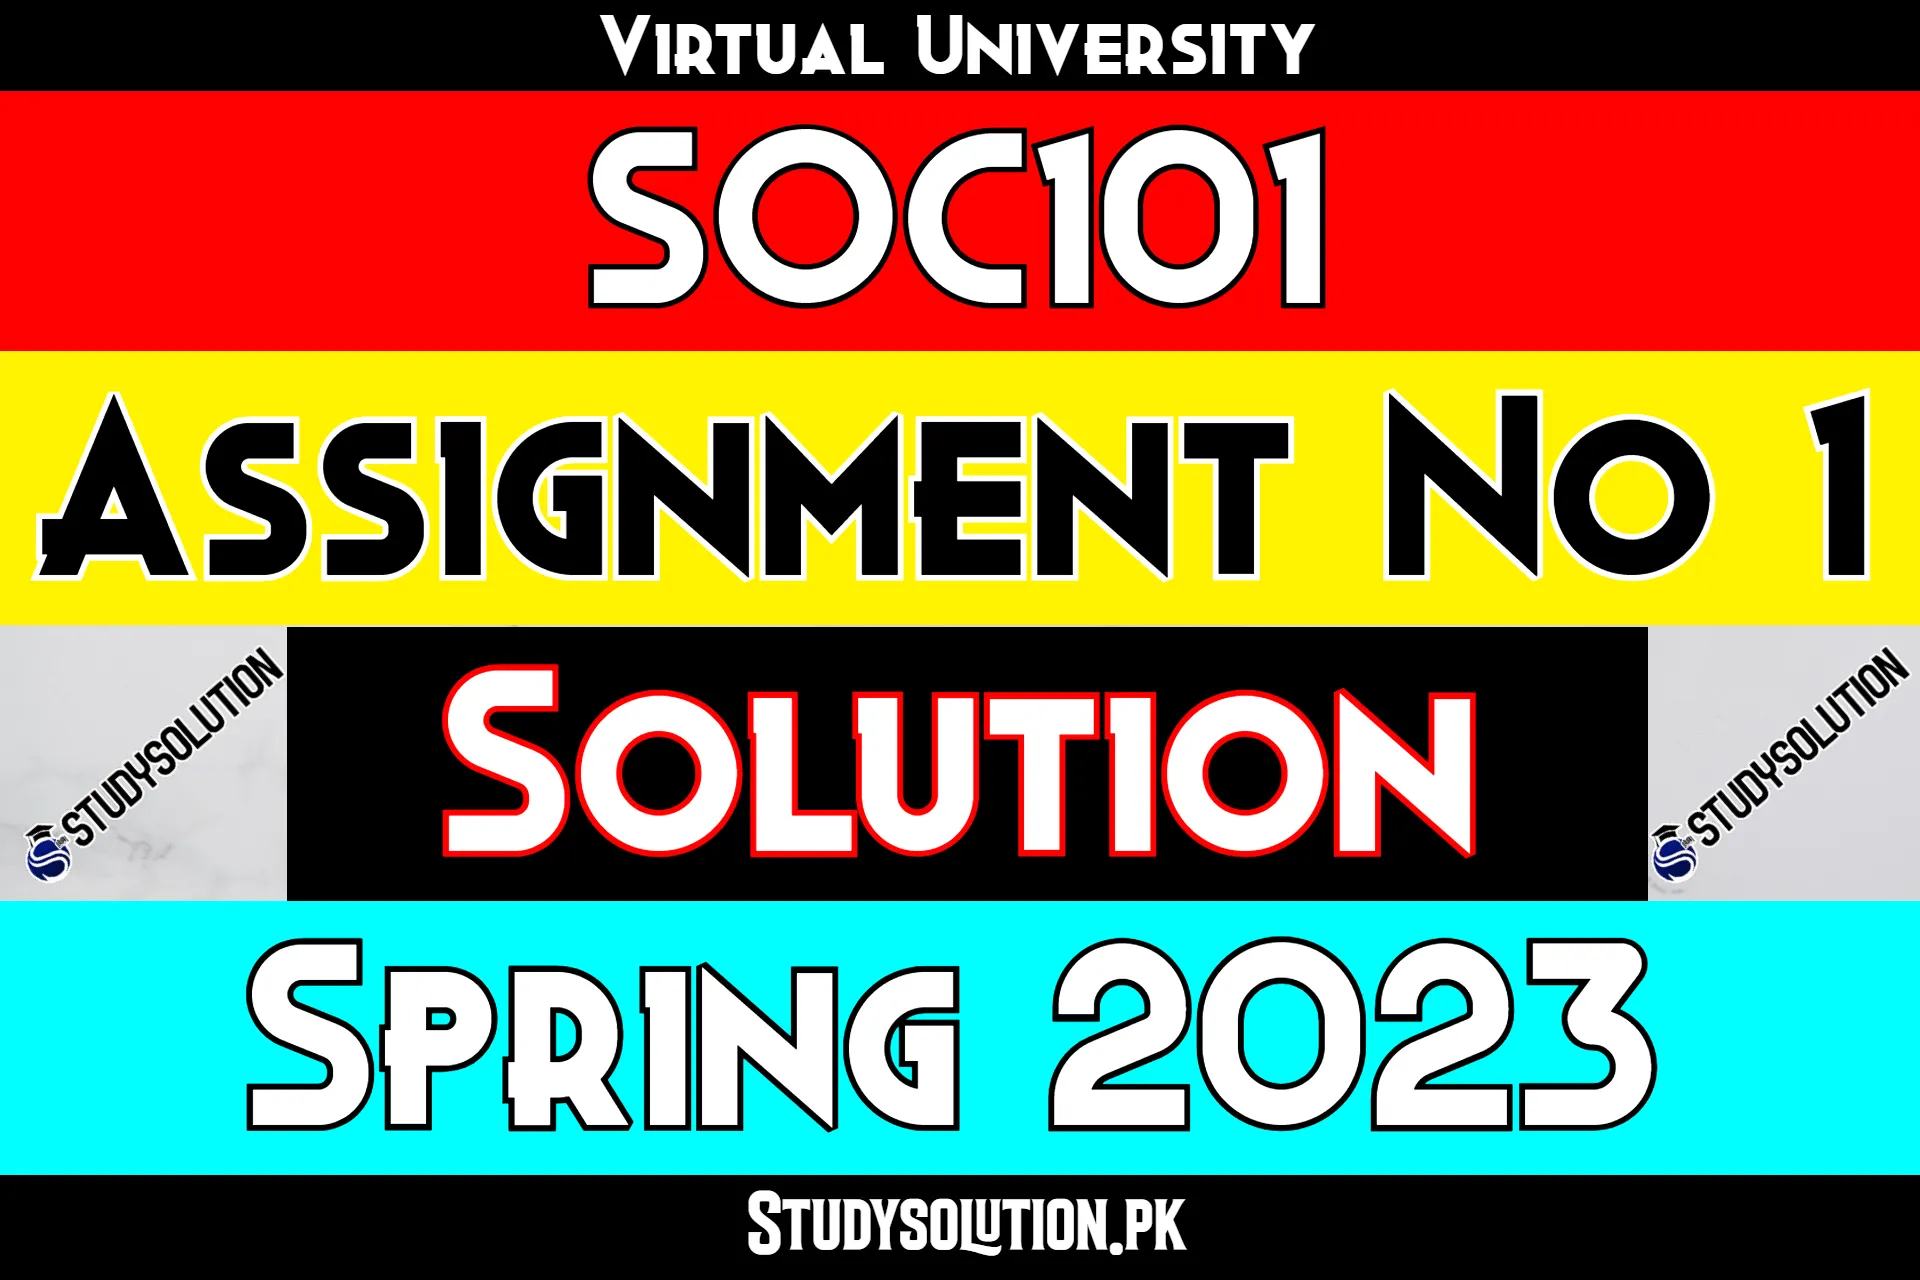 SOC101 Assignment No 1 Solution Spring 2023